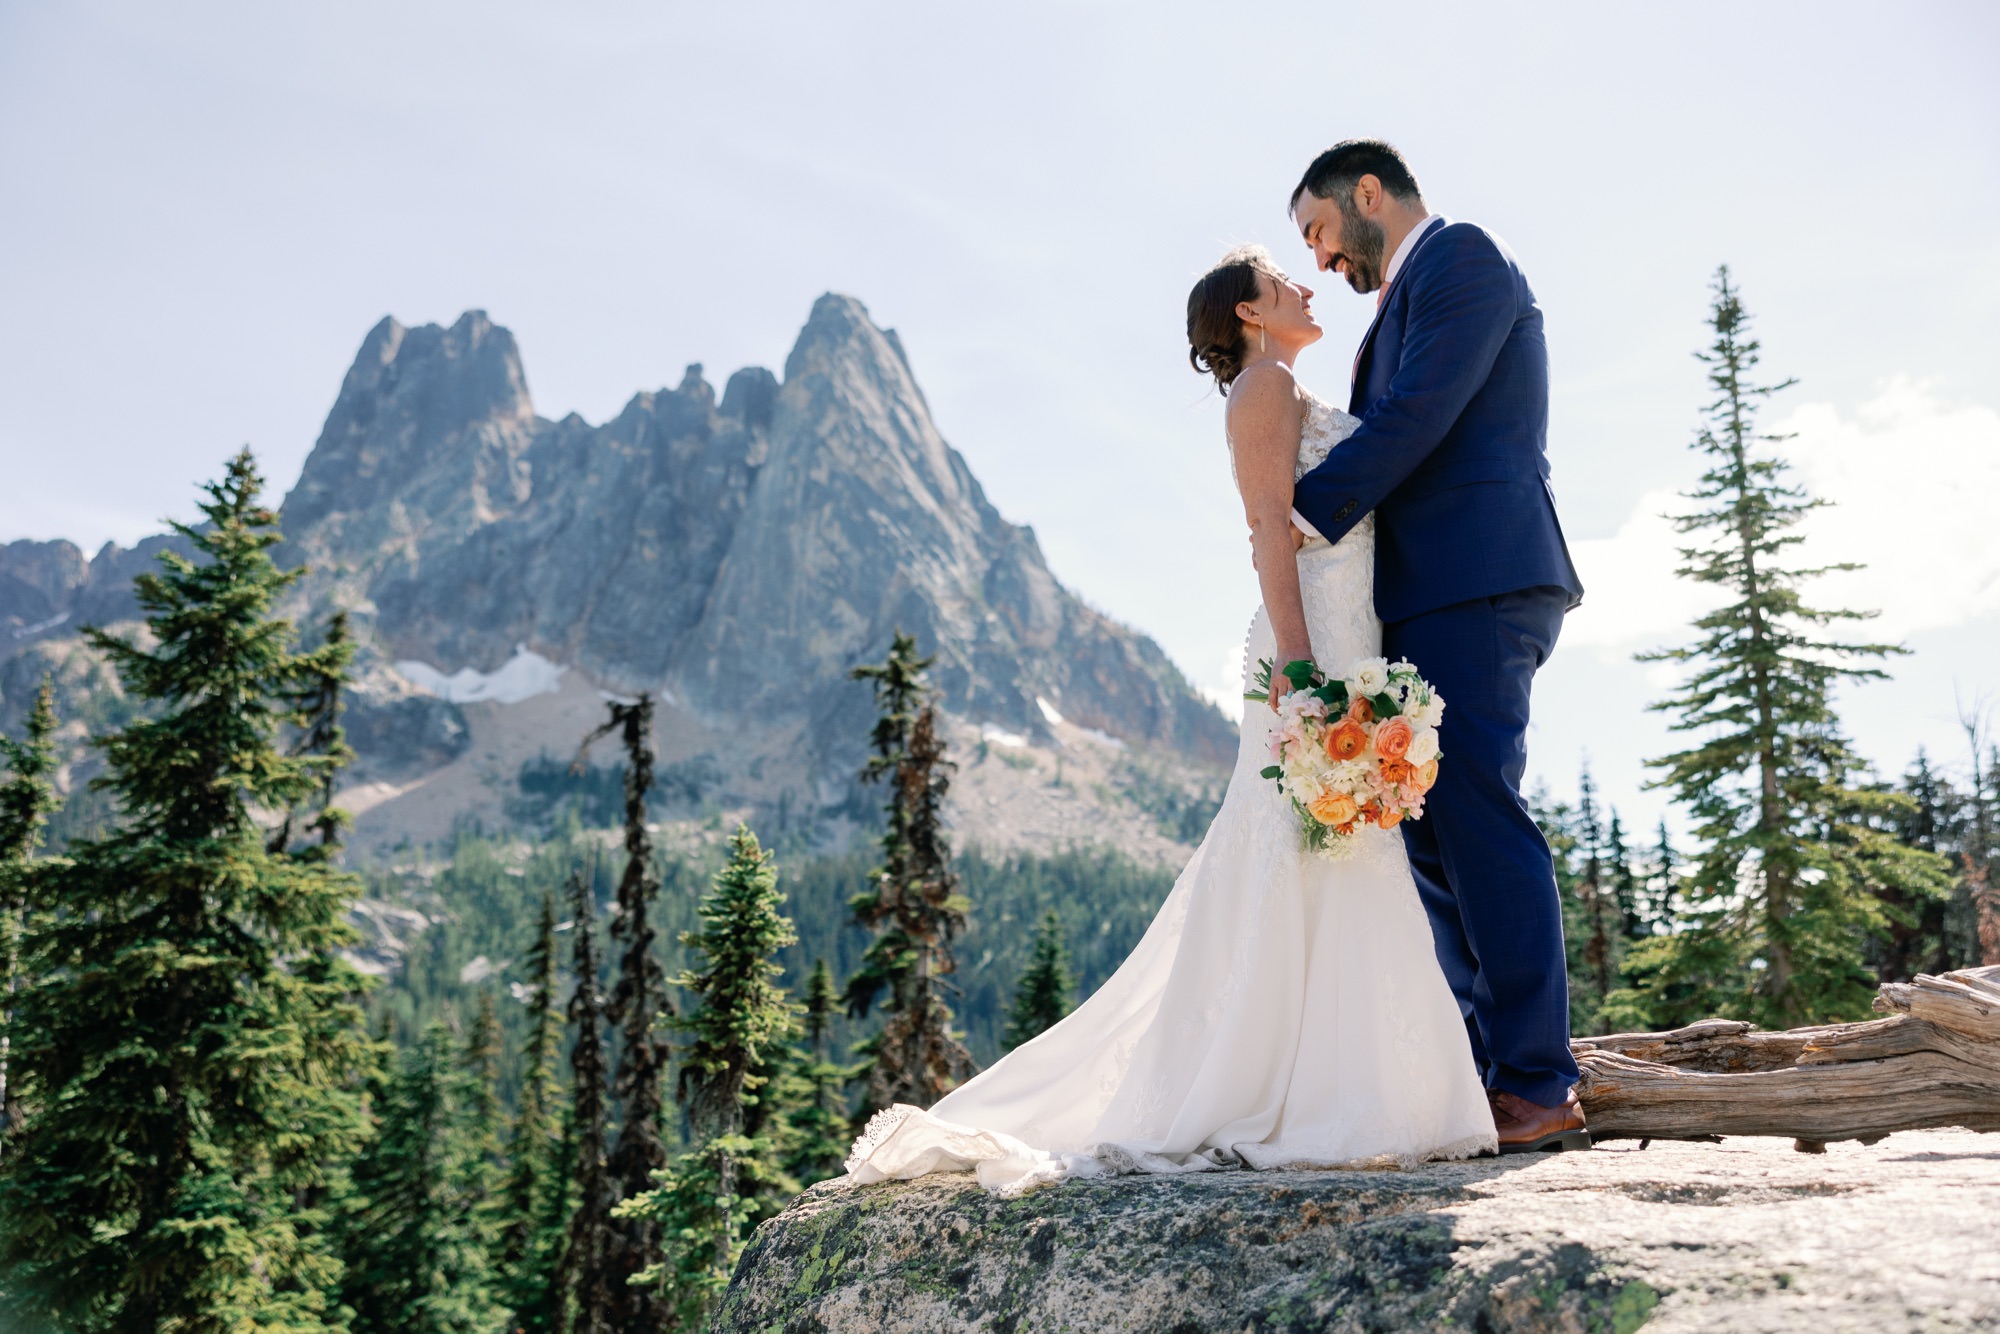 Bride and groom embracing on a mountain peak with a stunning backdrop of rugged mountains and pine trees.